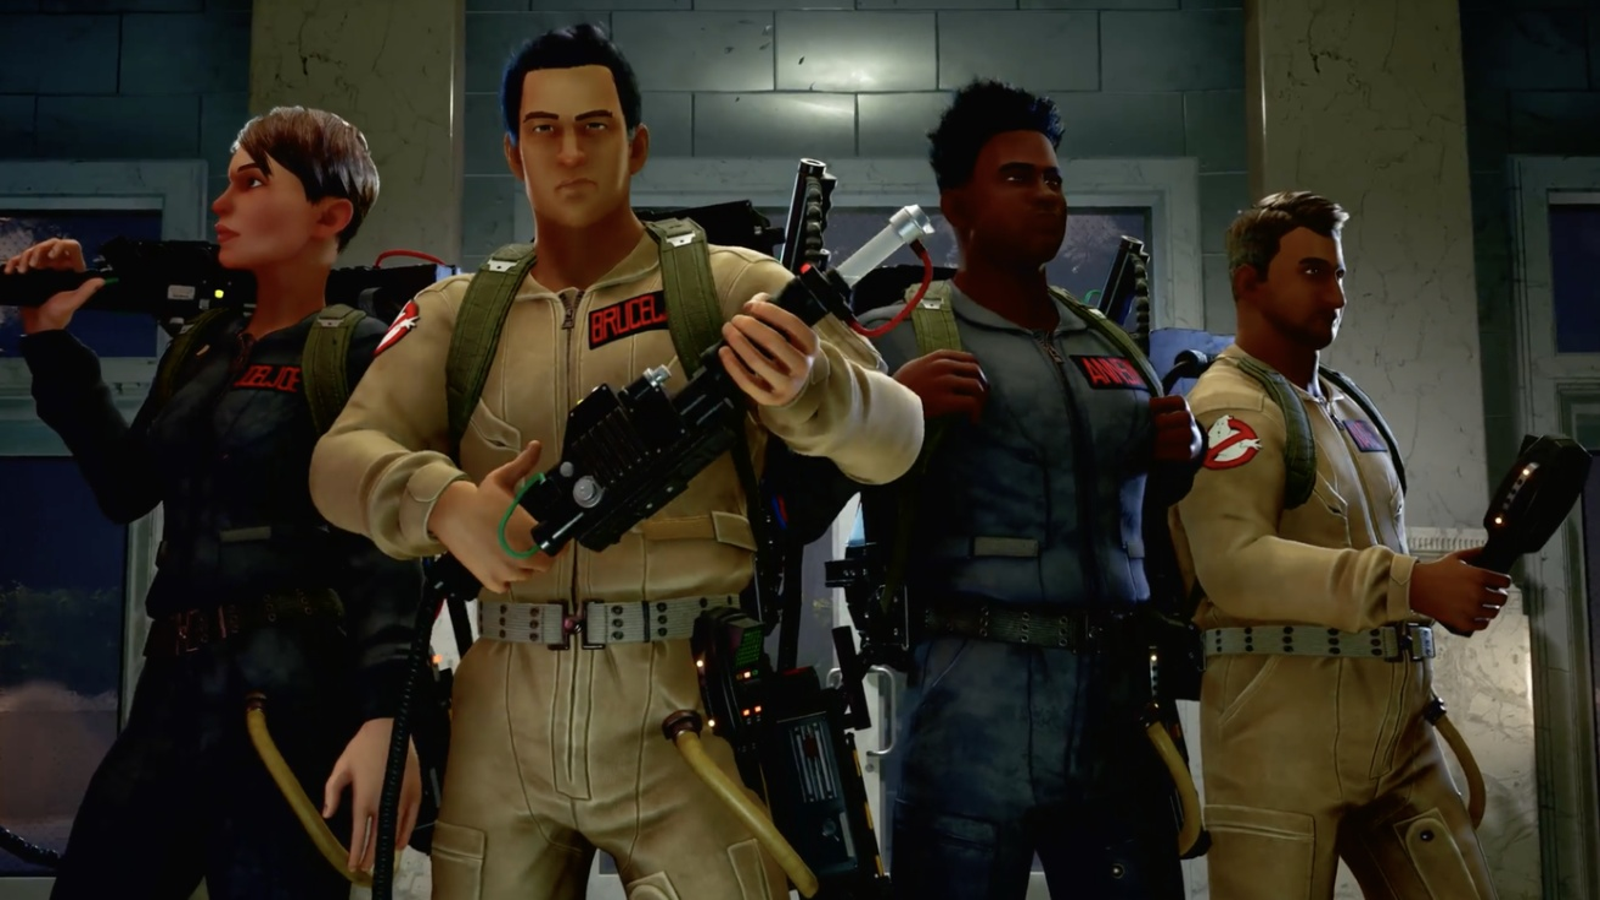 Ghostbusters: Spirits Unleashed Review - Frightening 4v1 - Game Informer